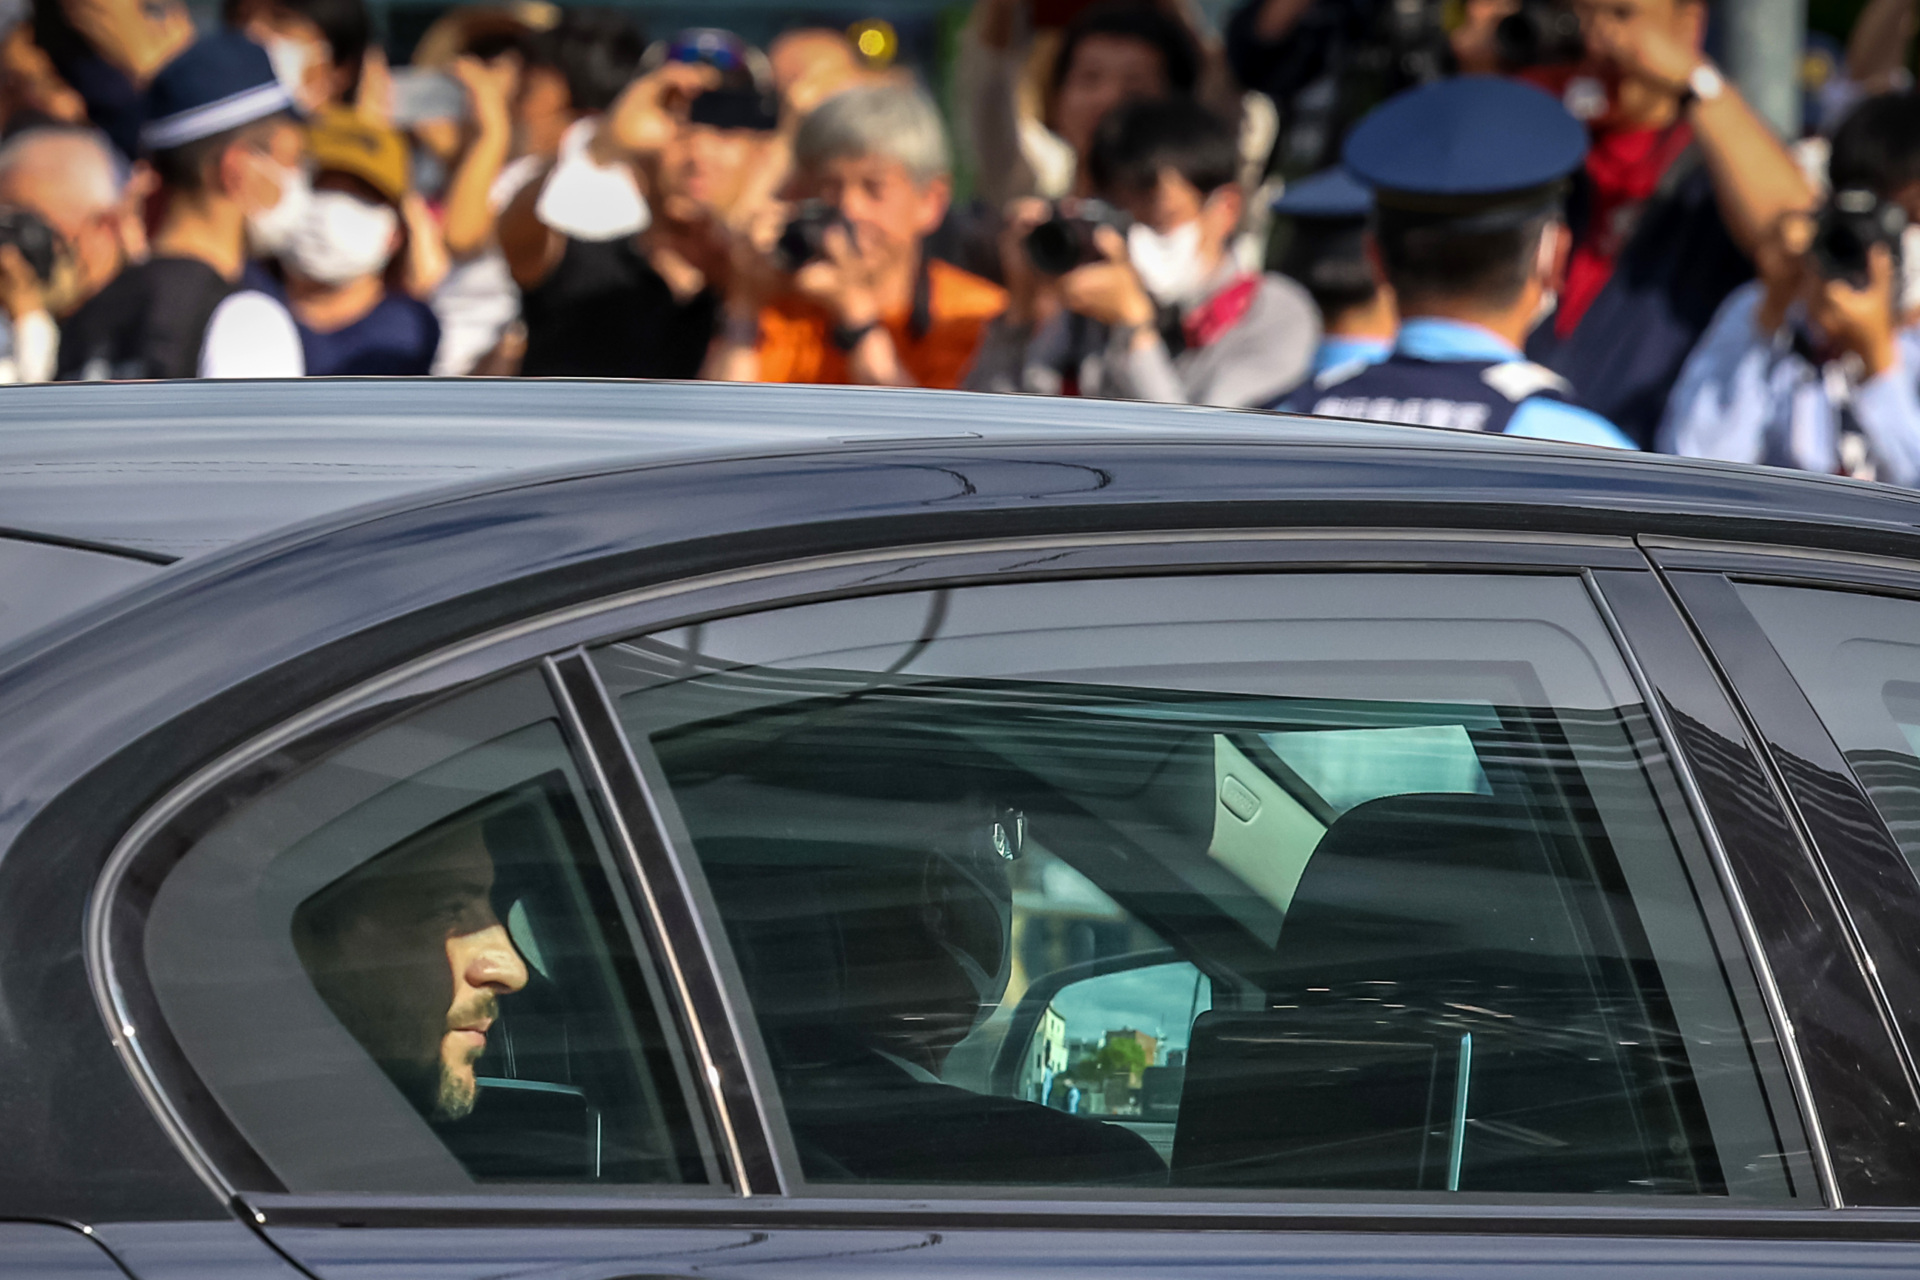 HIROSHIMA, JAPAN - MAY 20: Ukraine's President Volodymyr Zelensky travels in a motorcade as he arrives to meet global leaders at the G7 summit on May 20, 2023 in Hiroshima, Japan. The G7 summit will be held in Hiroshima from 19-22 May. (Photo by Takashi Aoyama/Getty Images)